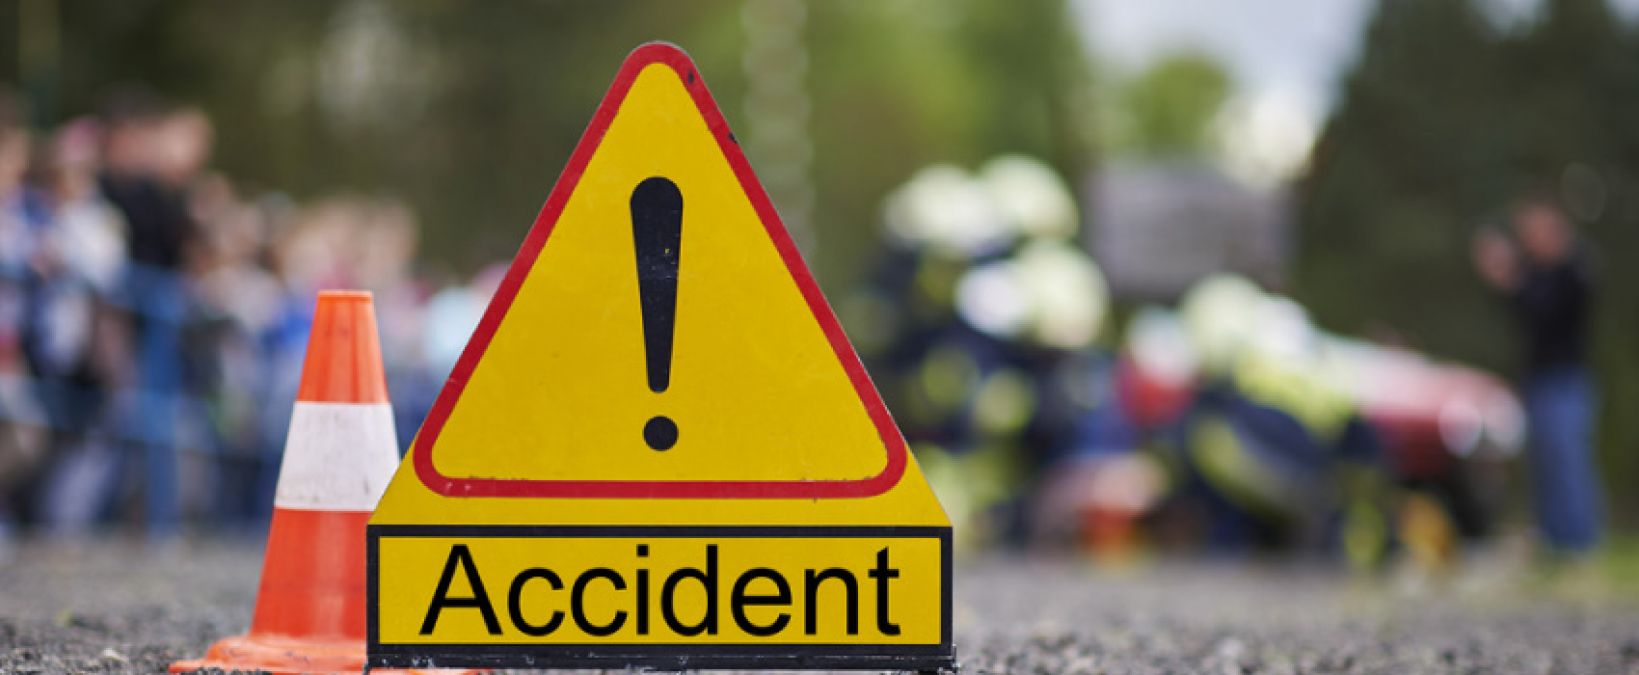 Scooty learner wife came on road dies in a road accident, husband critically injured